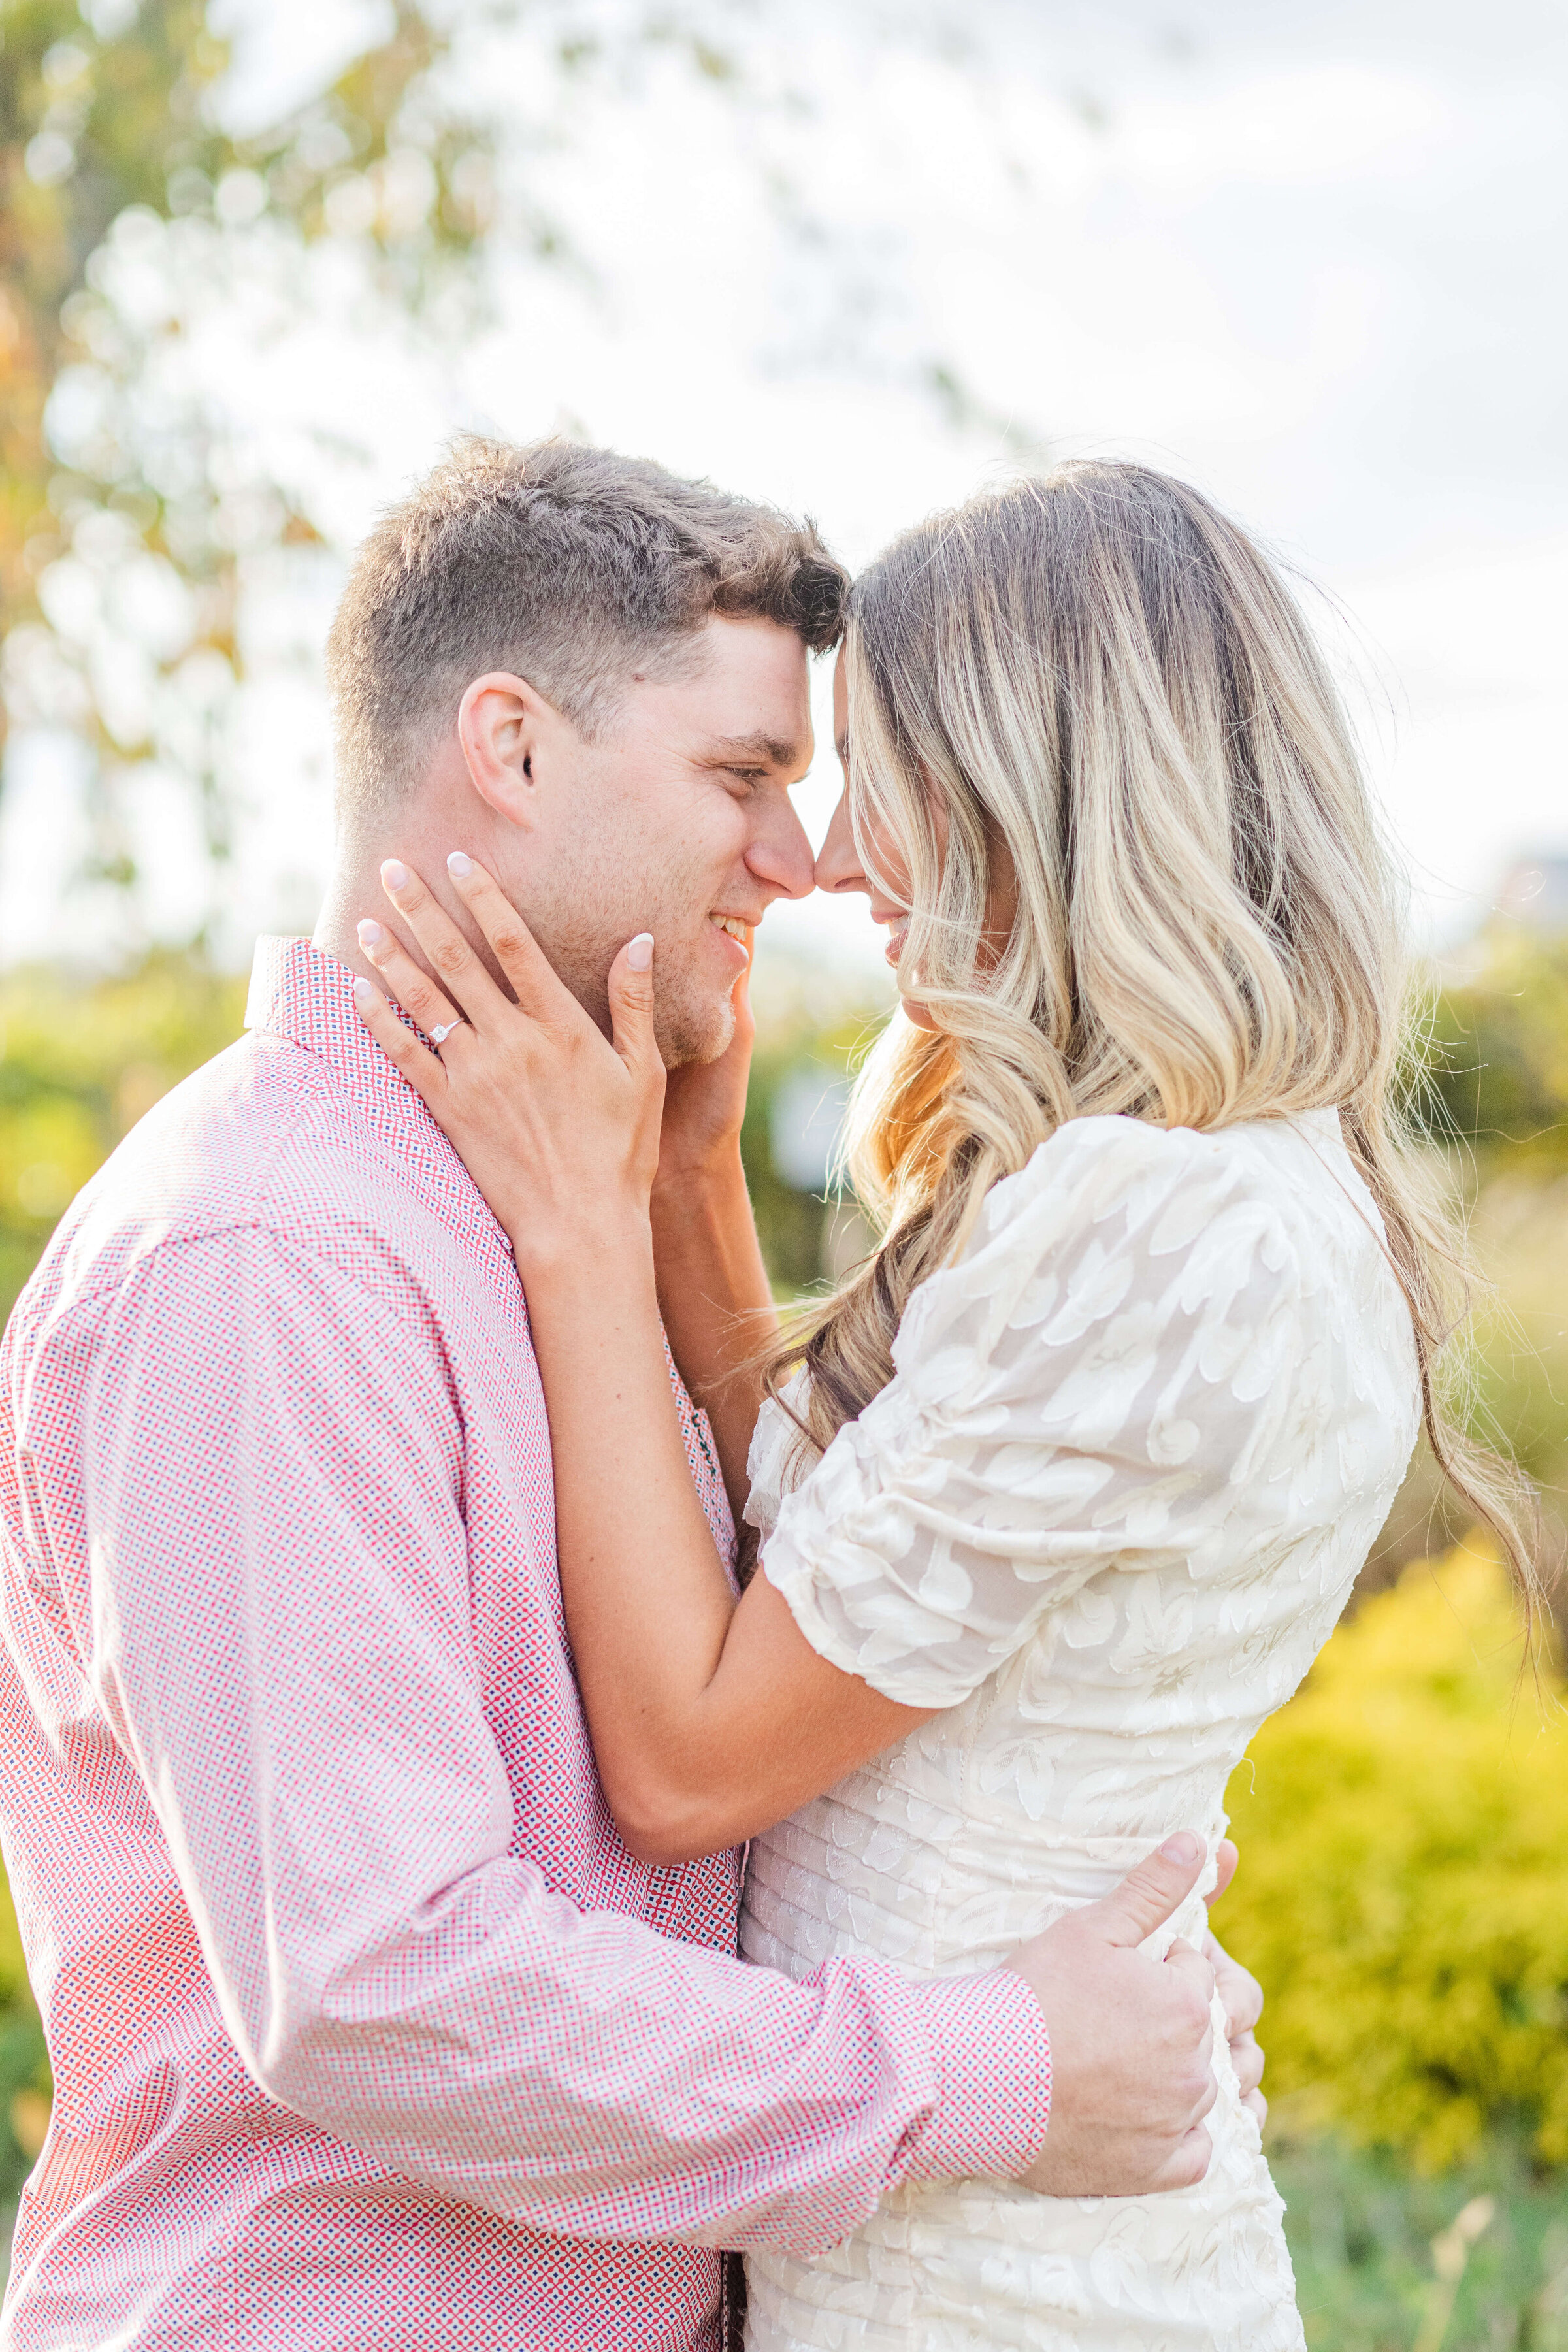 A man in a pink shirt and a woman in an ivory dress stand nose to nose as she has her hands on his face about to pull him in for a kiss. The sun is glowing behind them.